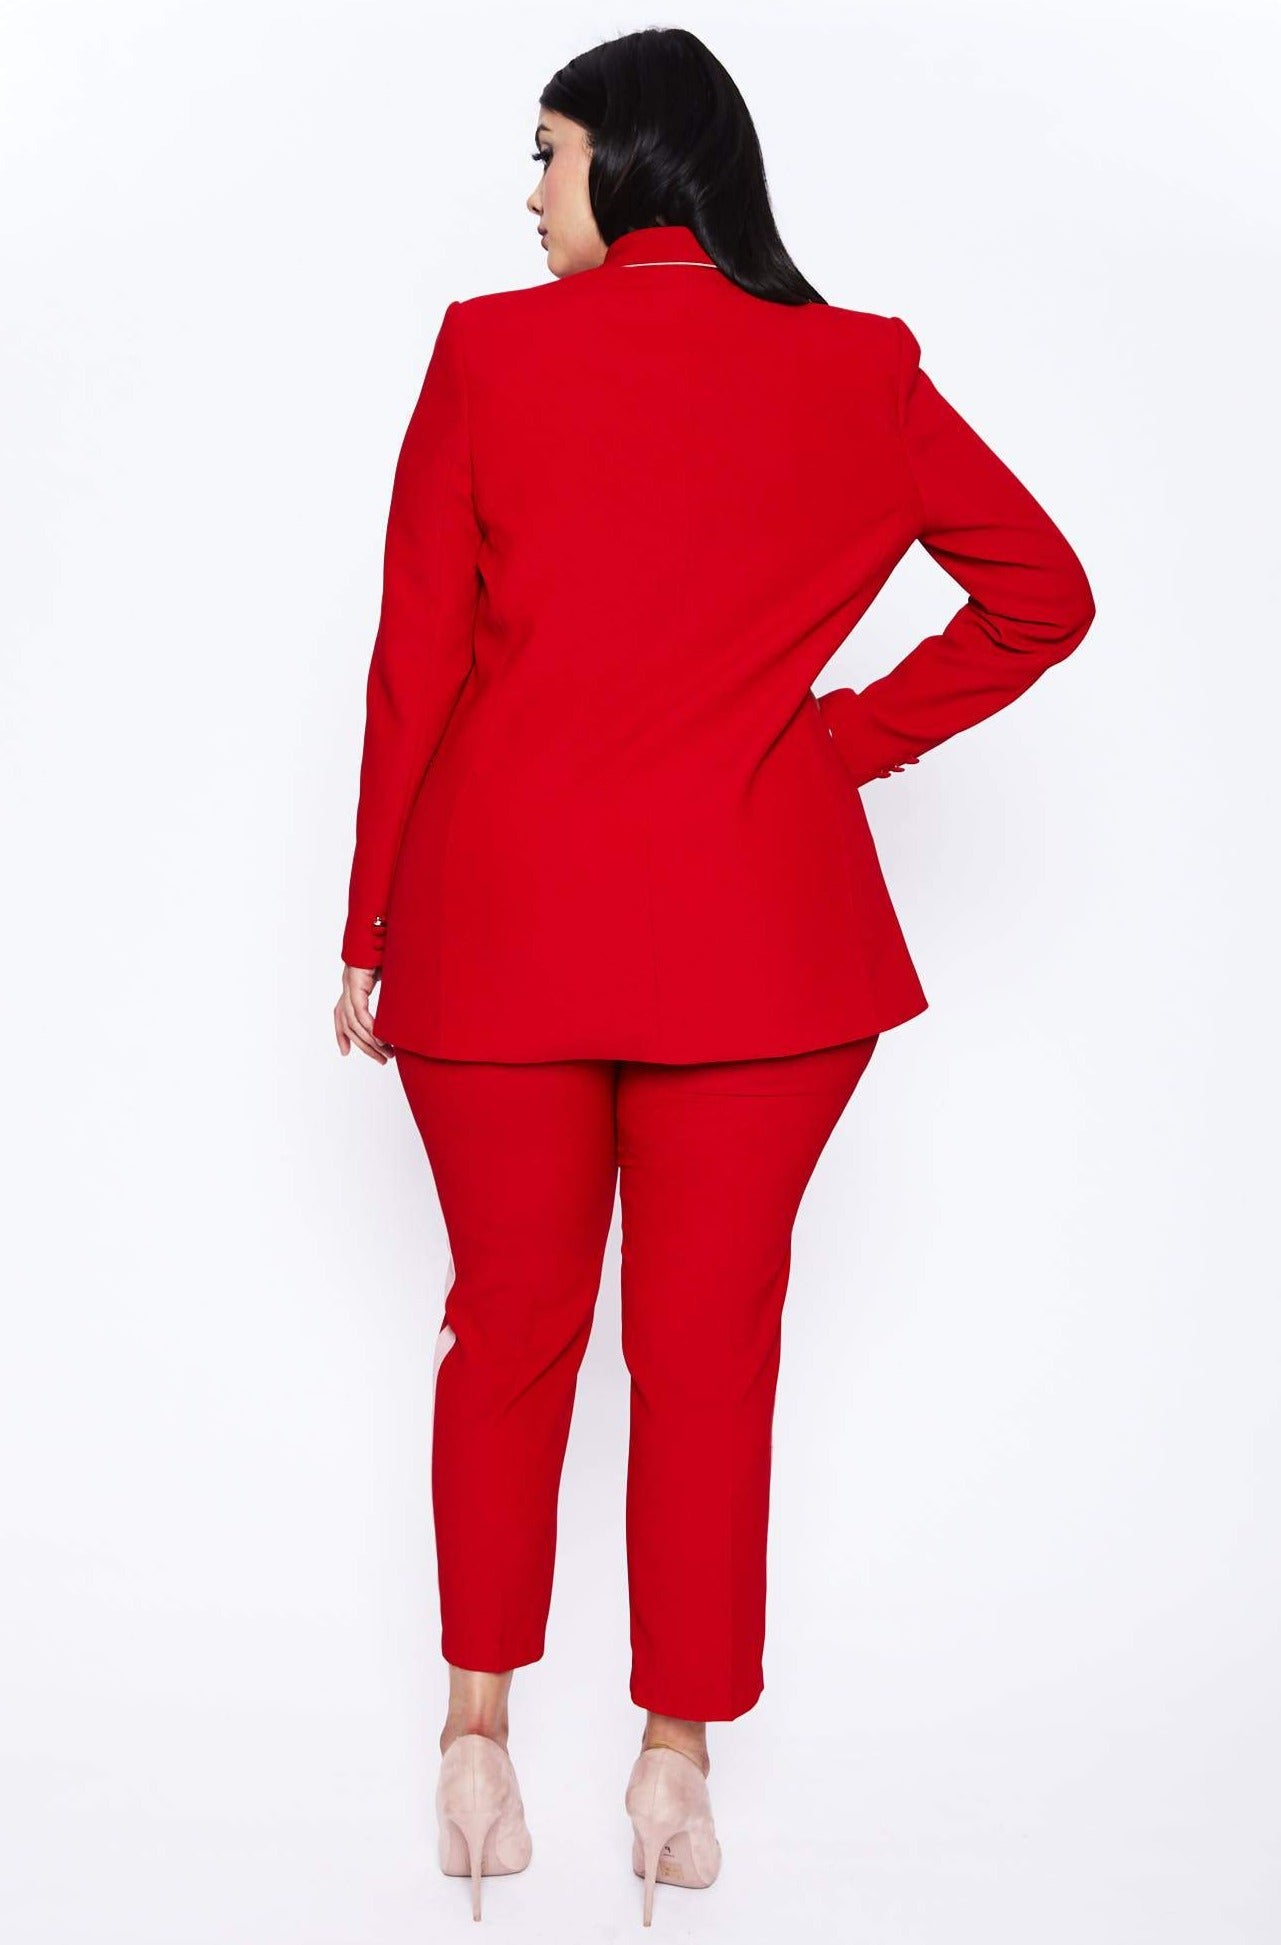 red suit by Hebe Studio